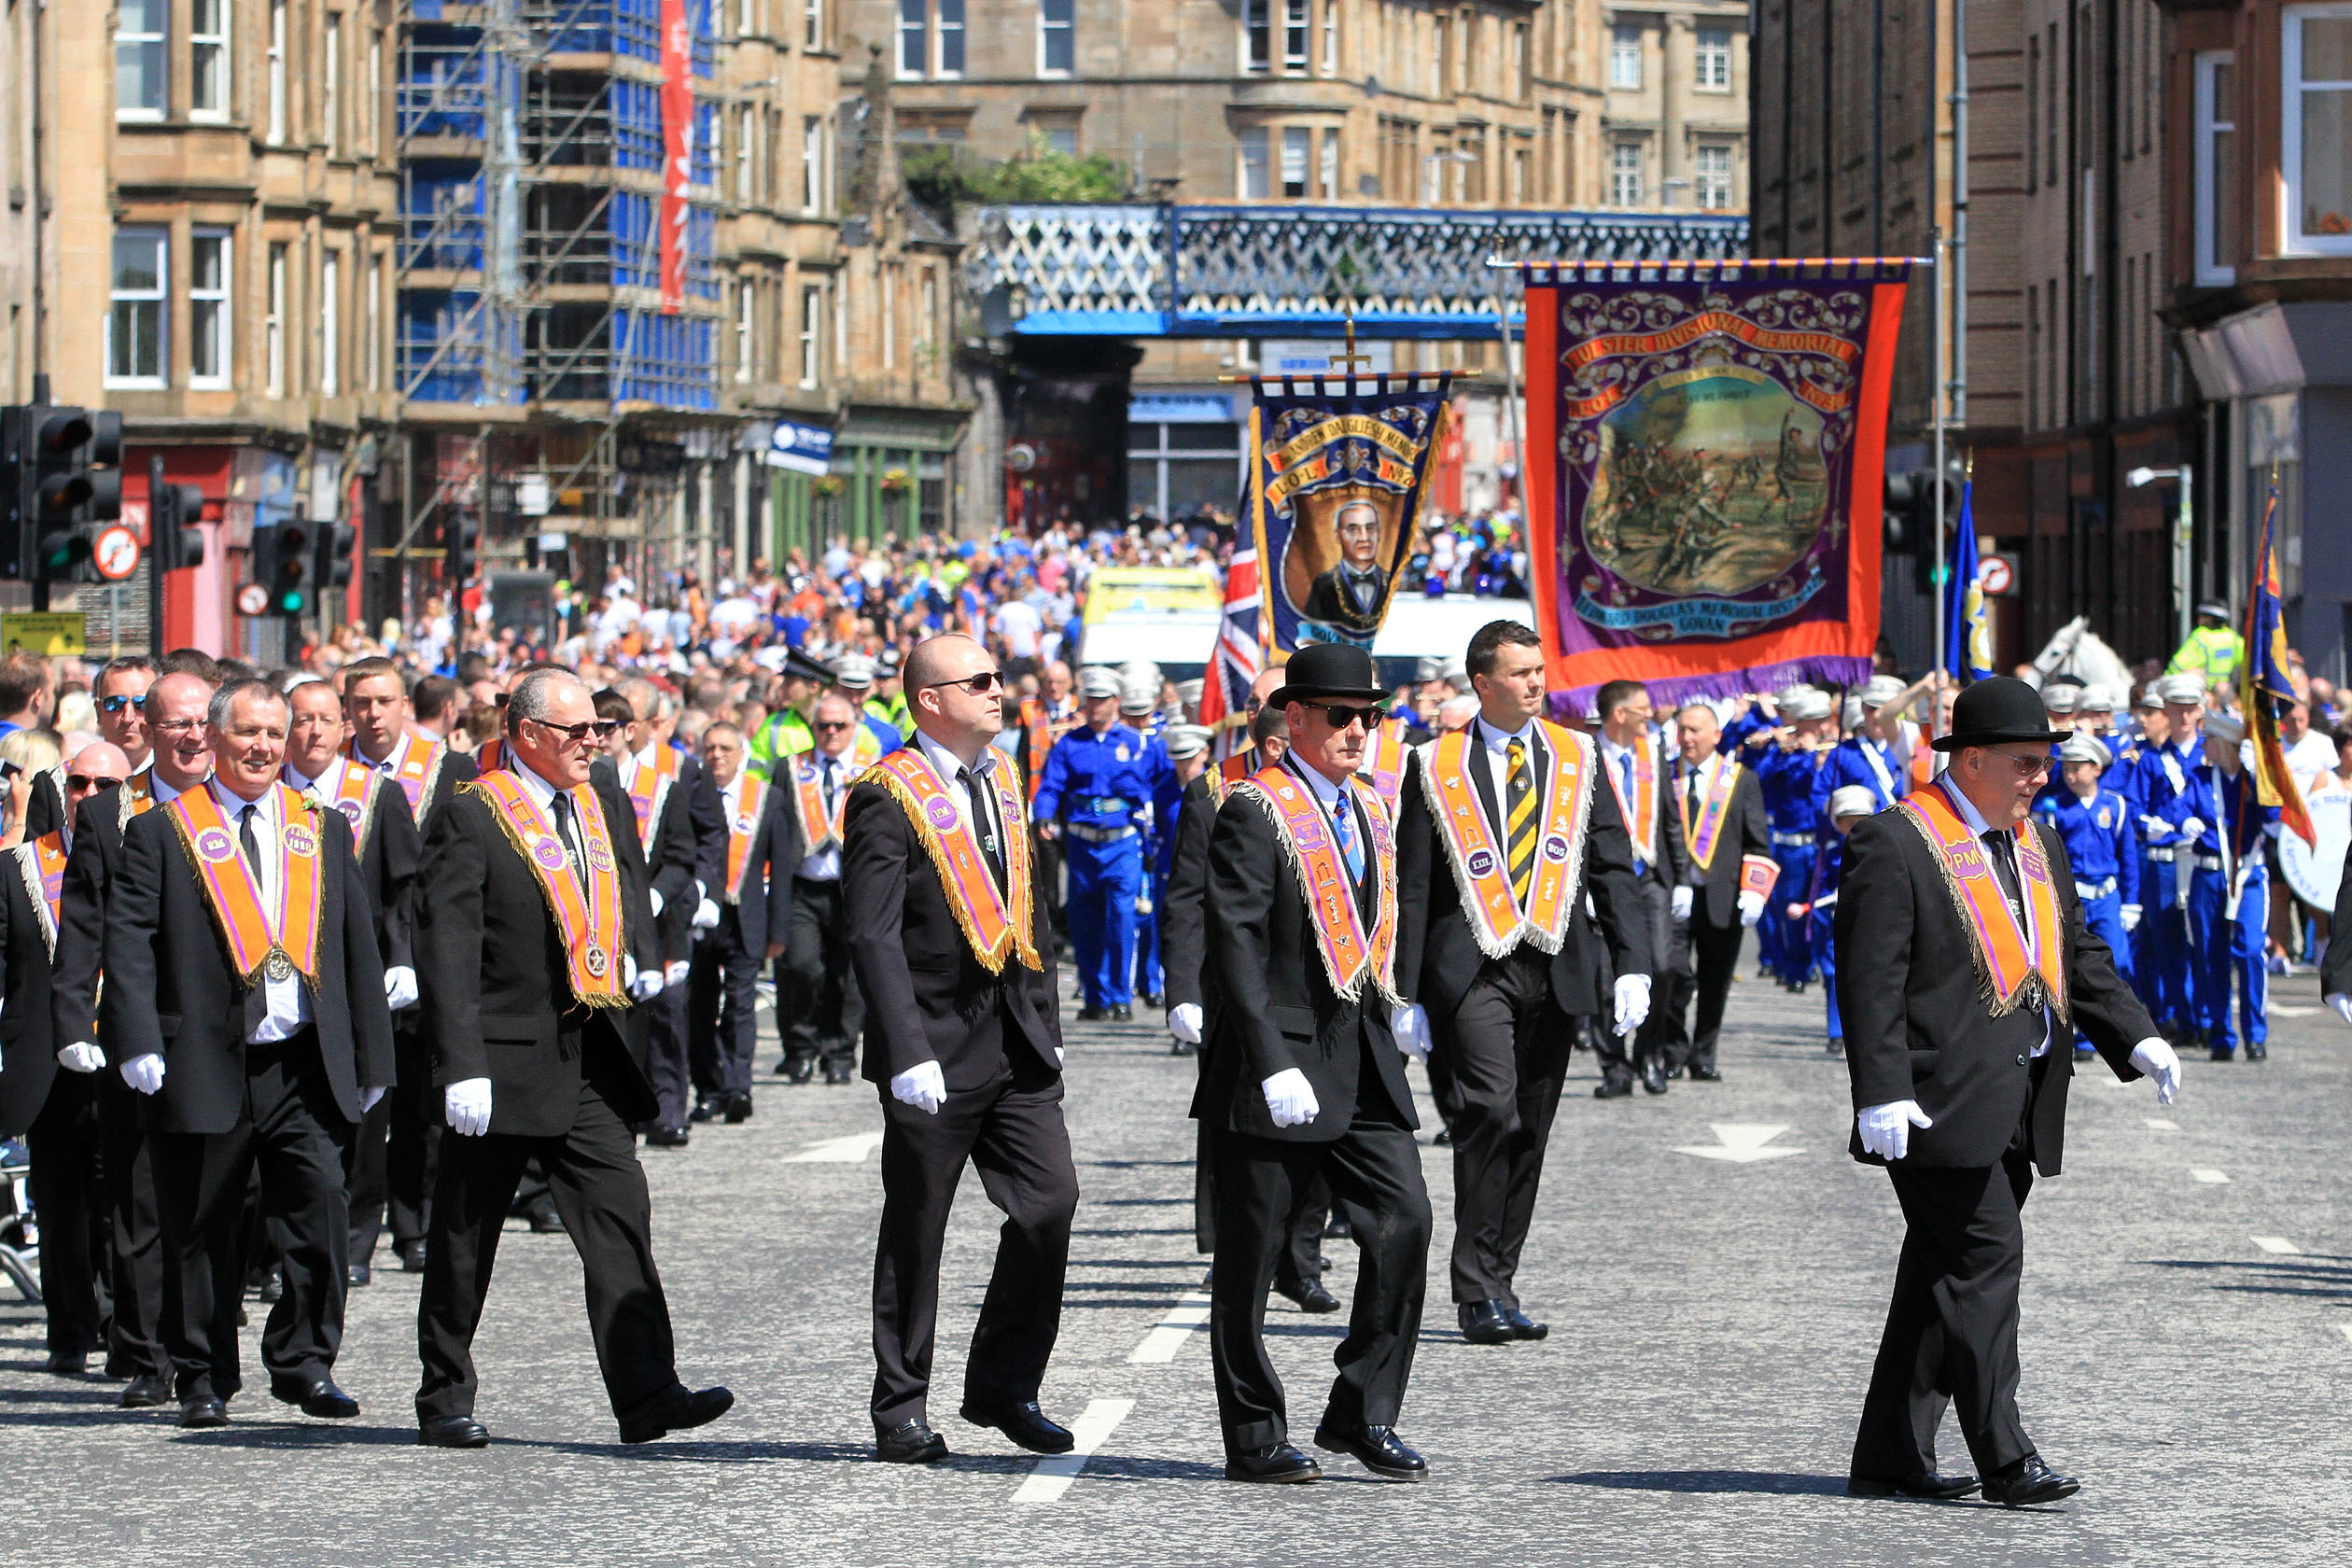 An Orange Order march in Glasgow (Barrie Marshall / DC Thomson)